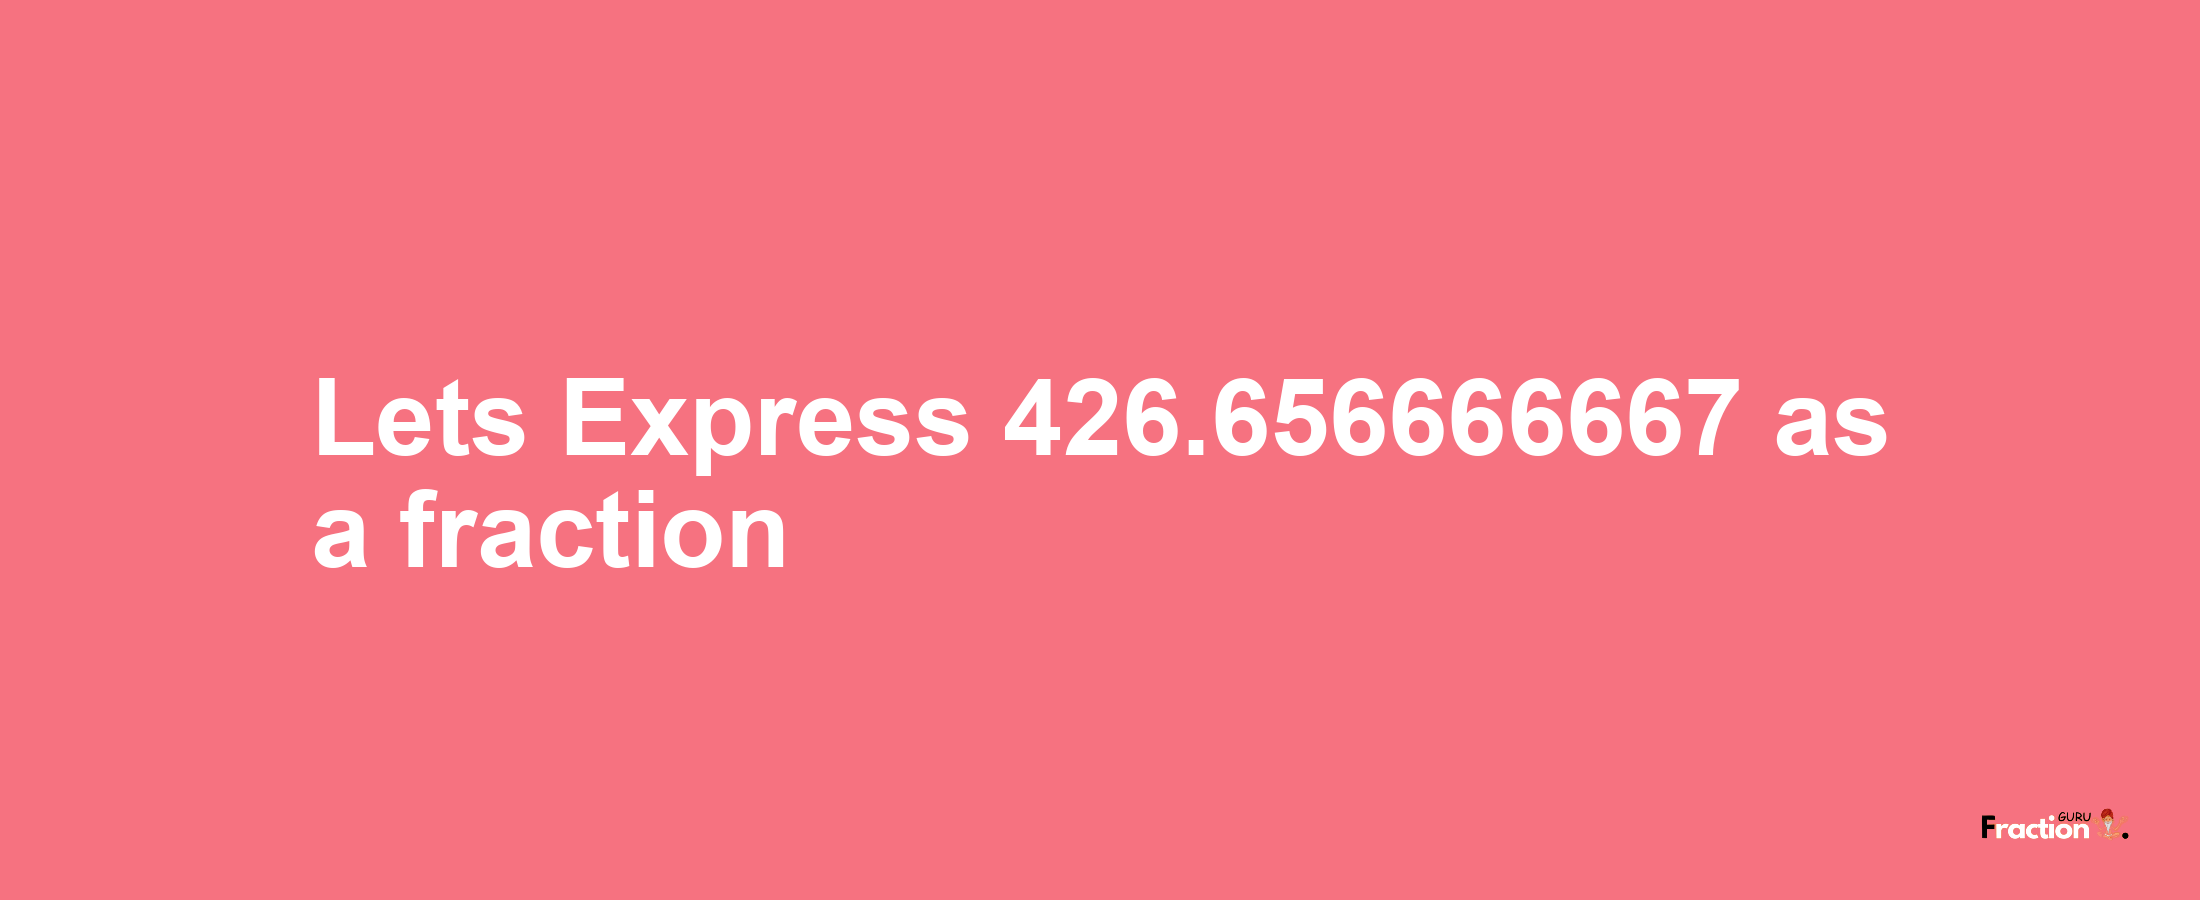 Lets Express 426.656666667 as afraction